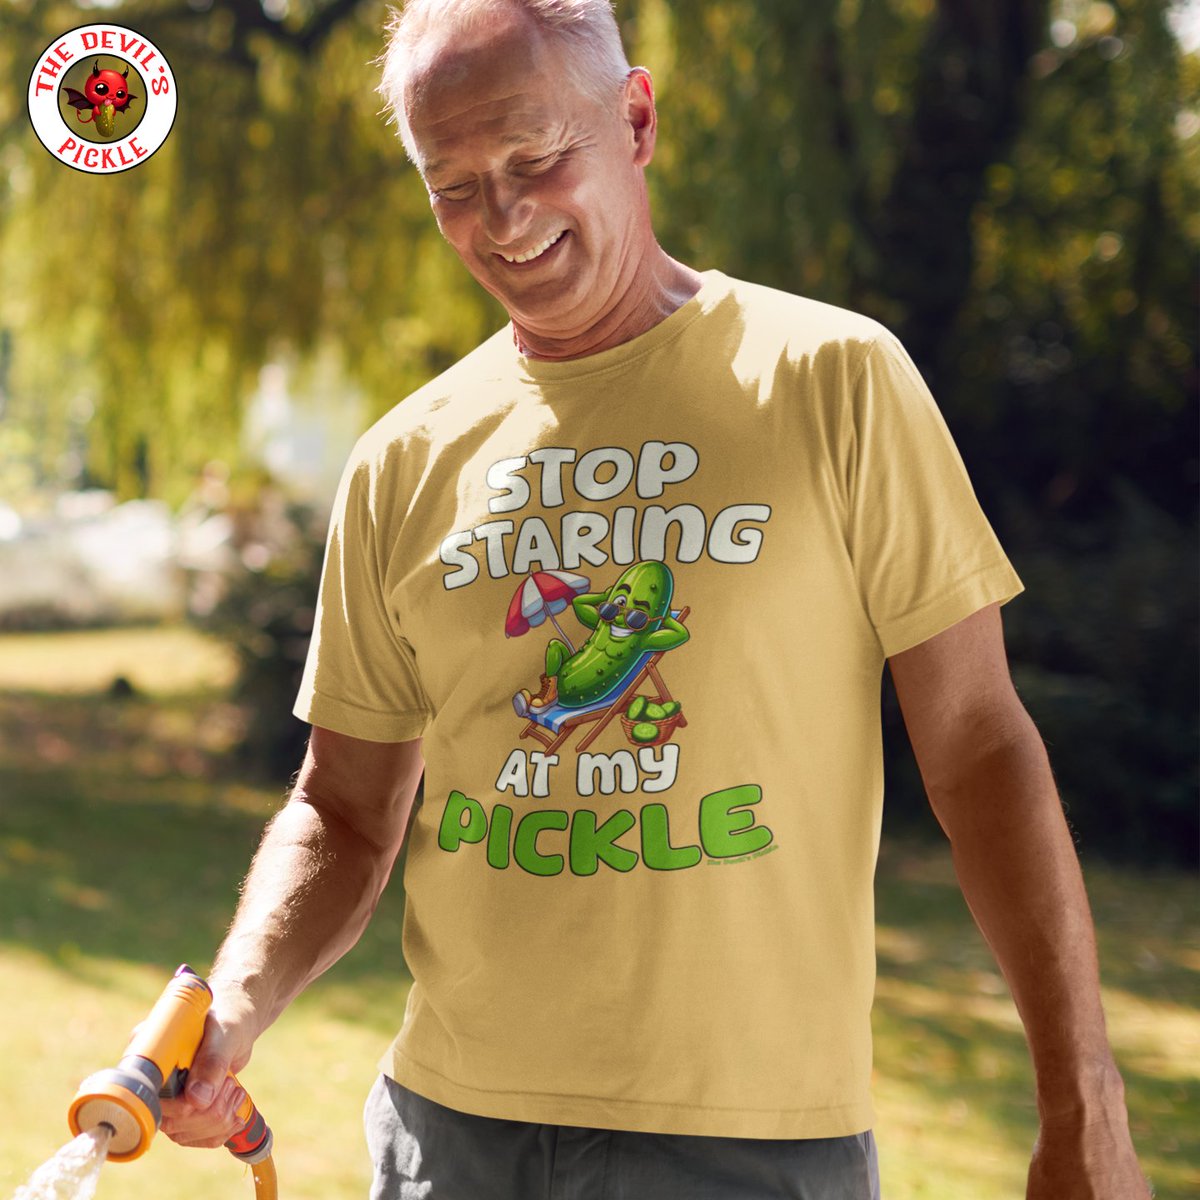 If you're gonna stare, at least ask for a taste of my pickle 🥒 The Best Adult Humor Tees and Shirts On The Line!

#adulthumor #bestshirts #funnyapparel #pickleproud #adultmeme #adultinghumor #funshirts #offensivetshirts #adultjokes #freeshipping #thedevilspickle #adulttees